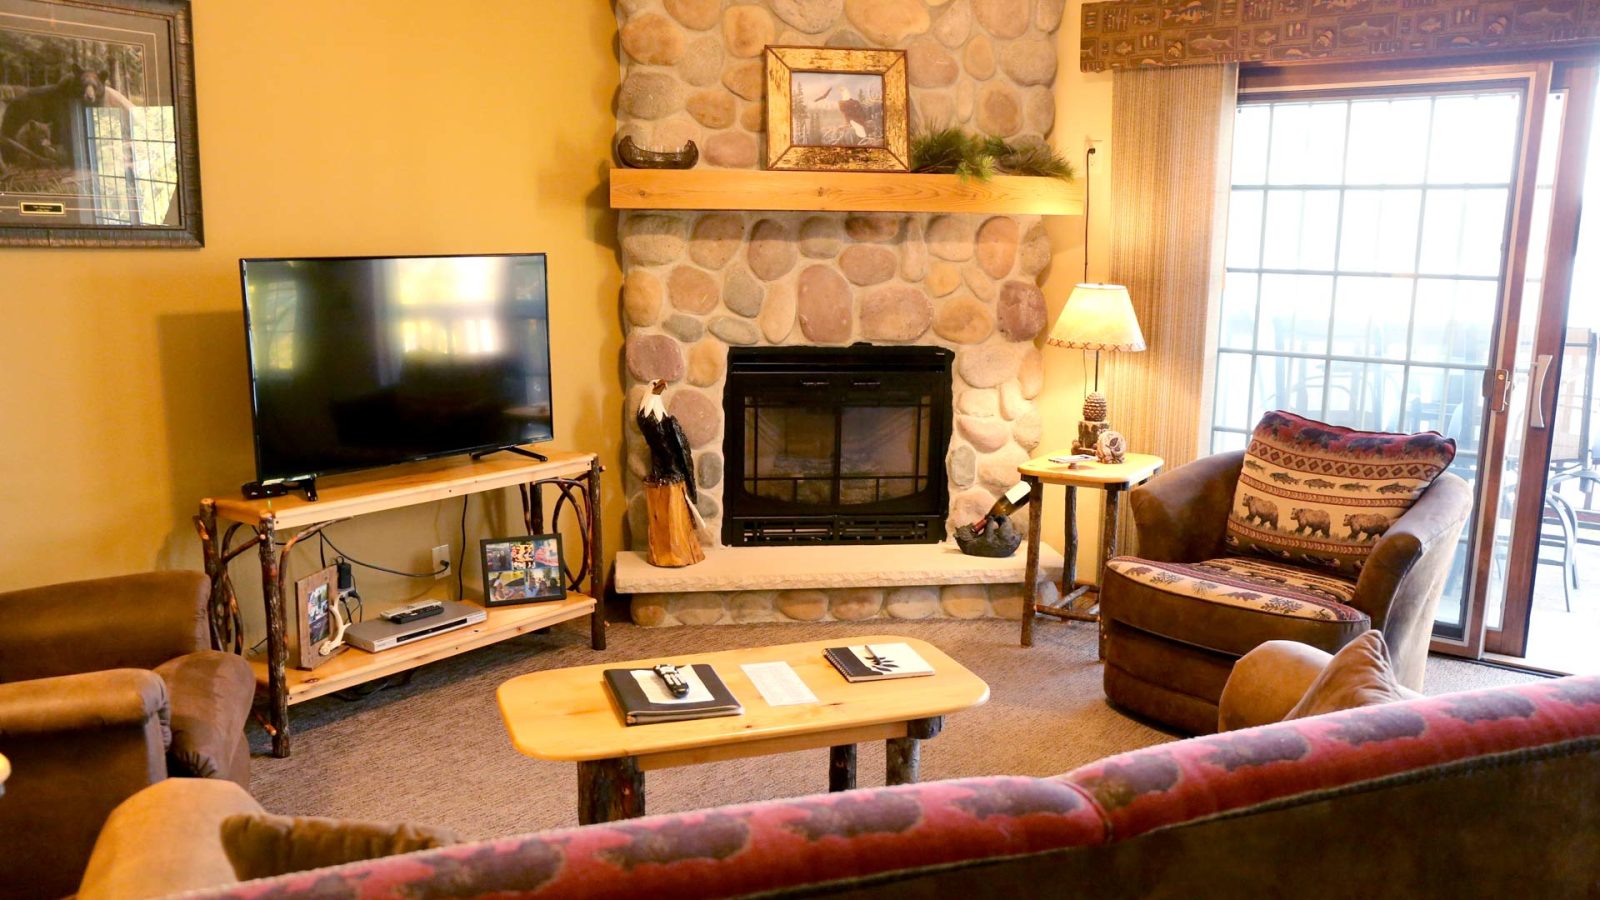 Lodge interior with fireplace, couch, recliner, and television